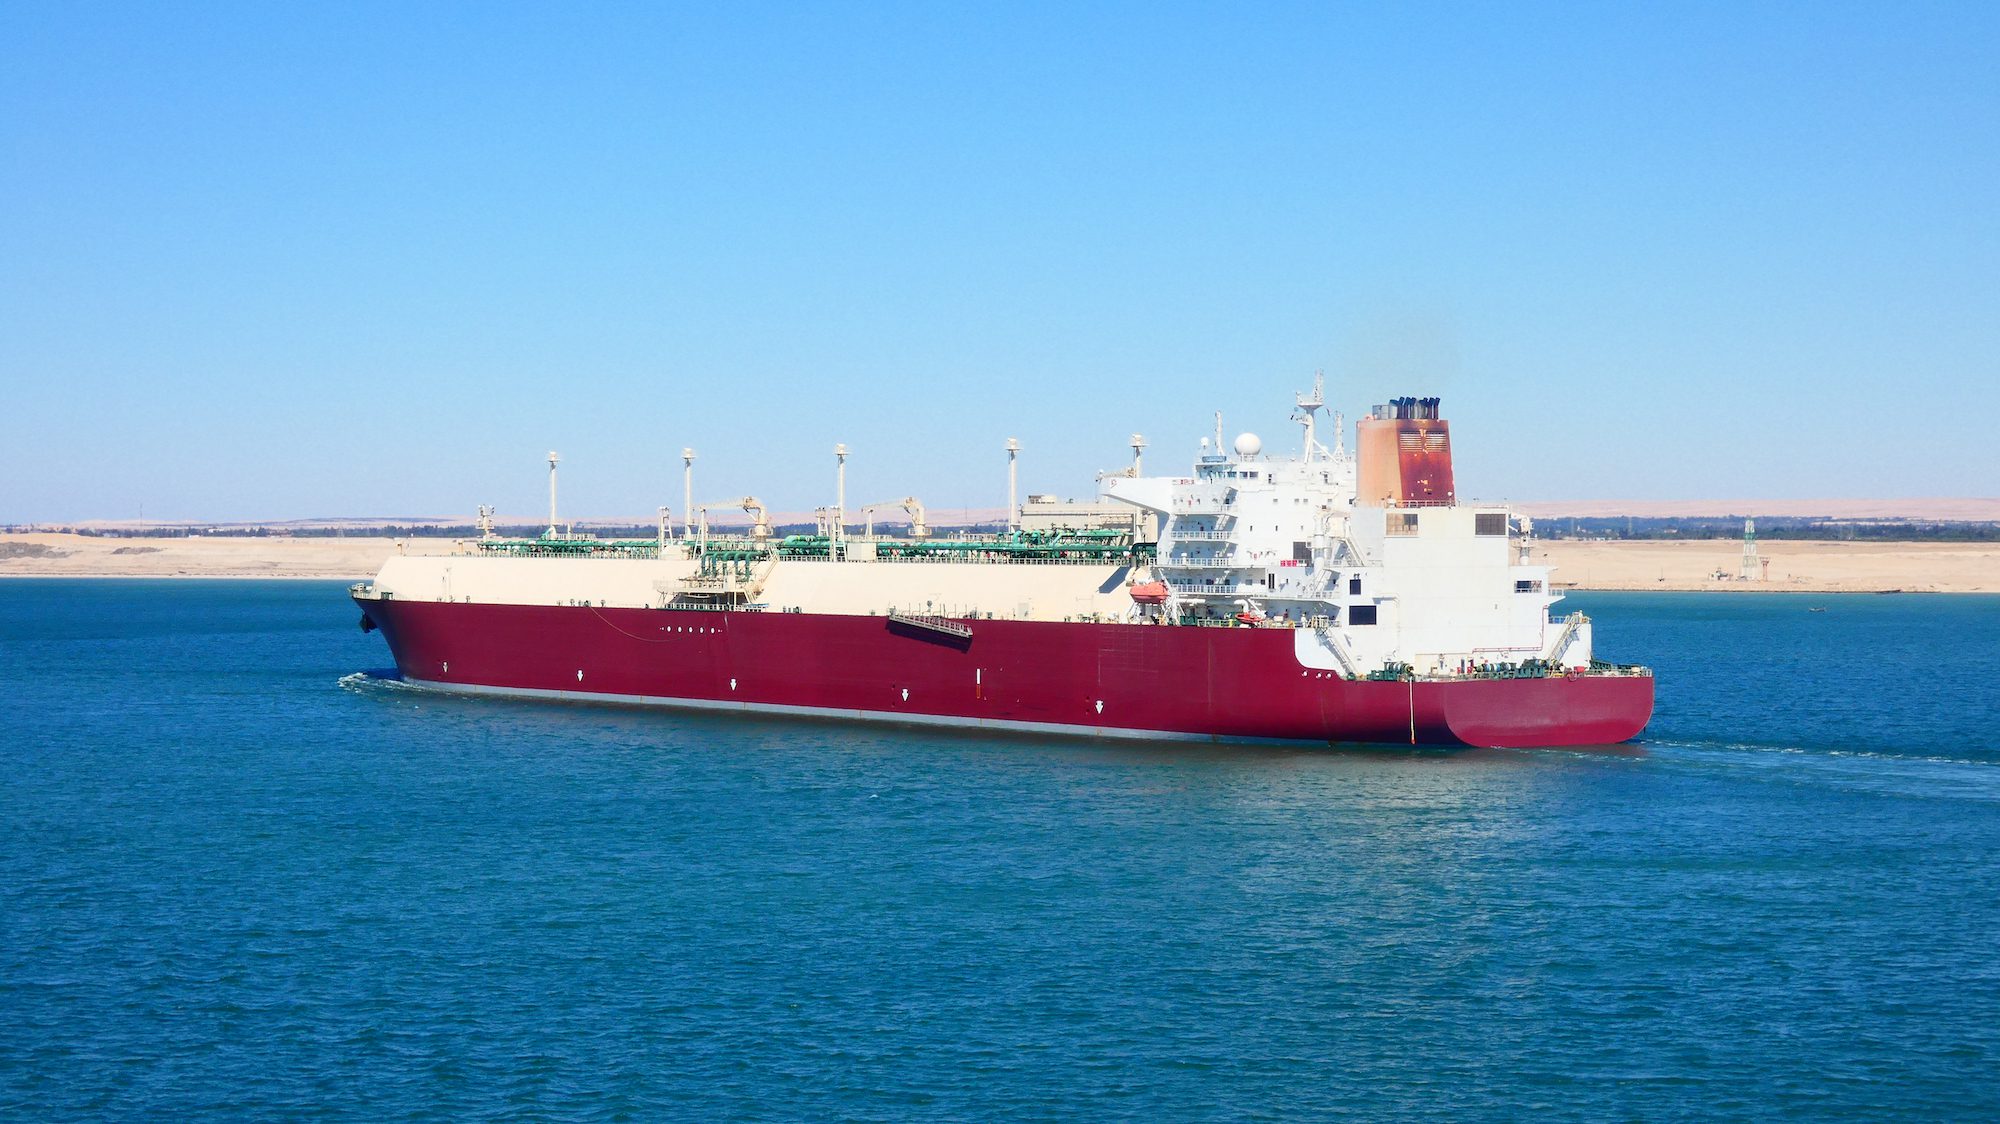 A red LNG carrier in the Suez Canal